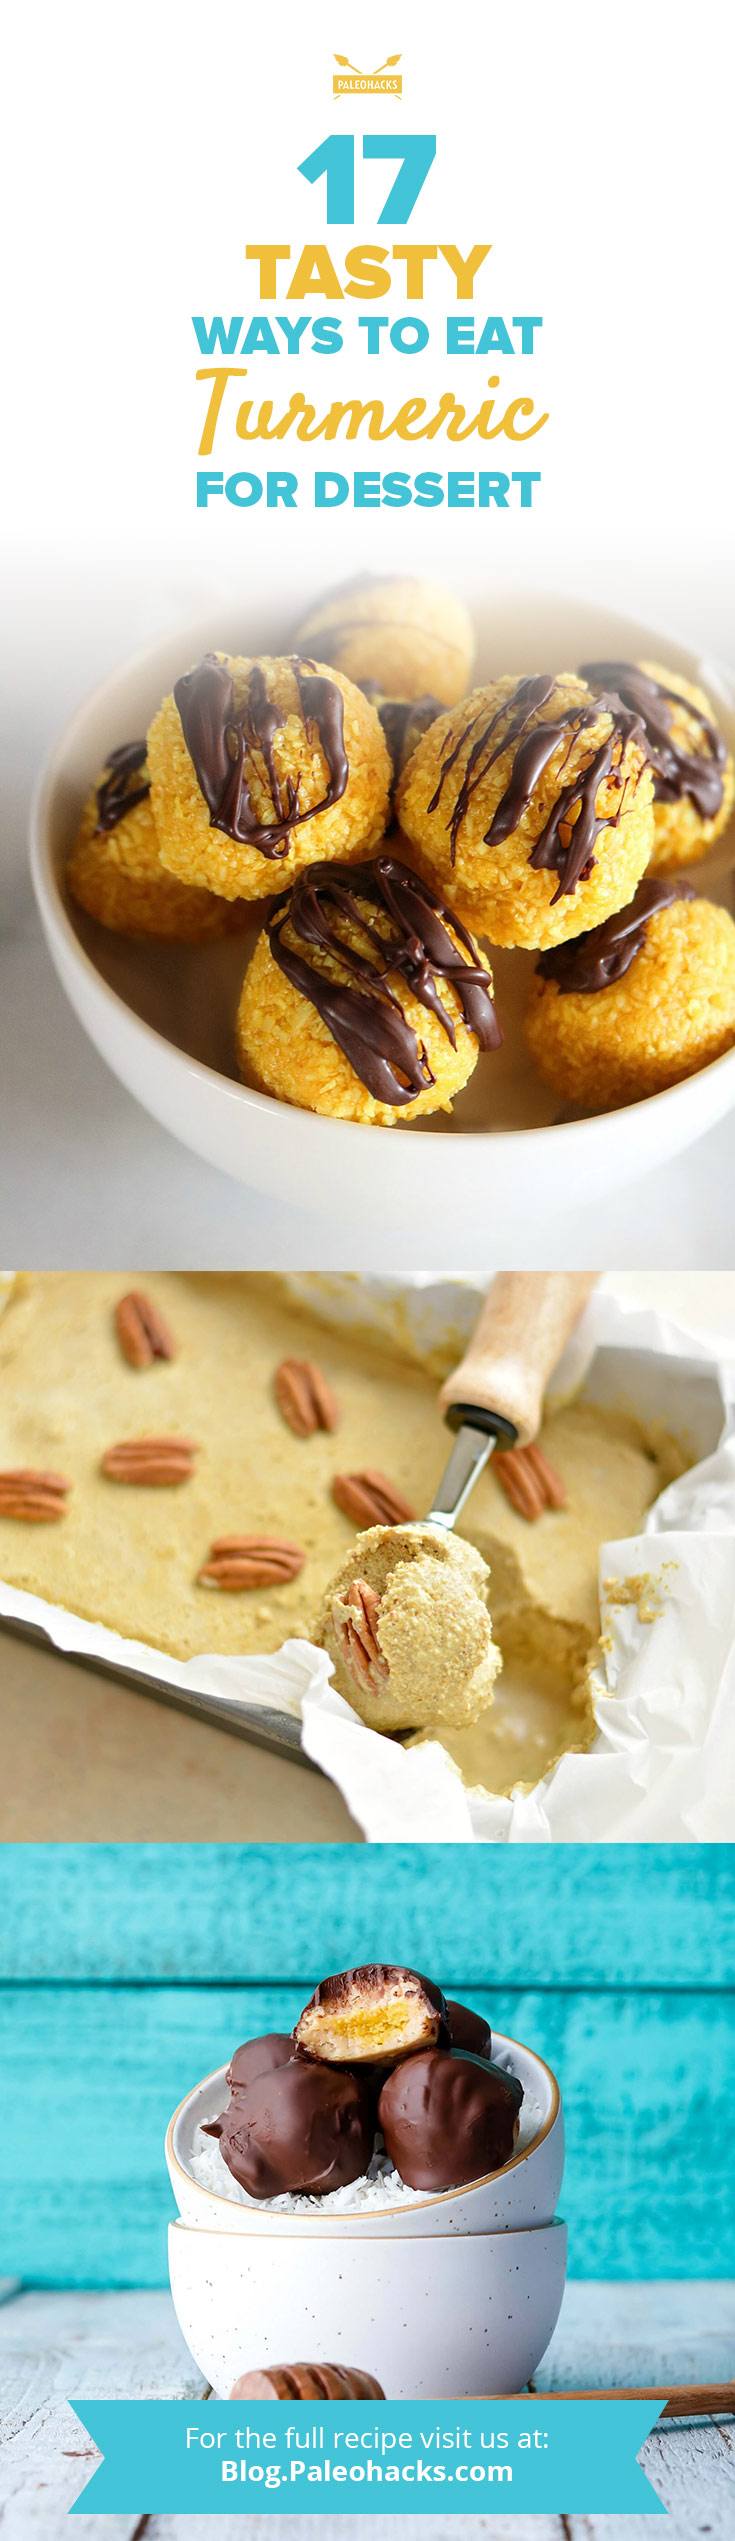 Give your Paleo treats a vibrant twist with these delicious turmeric dessert recipes! There’s no shortage of ways to make turmeric-laced desserts.